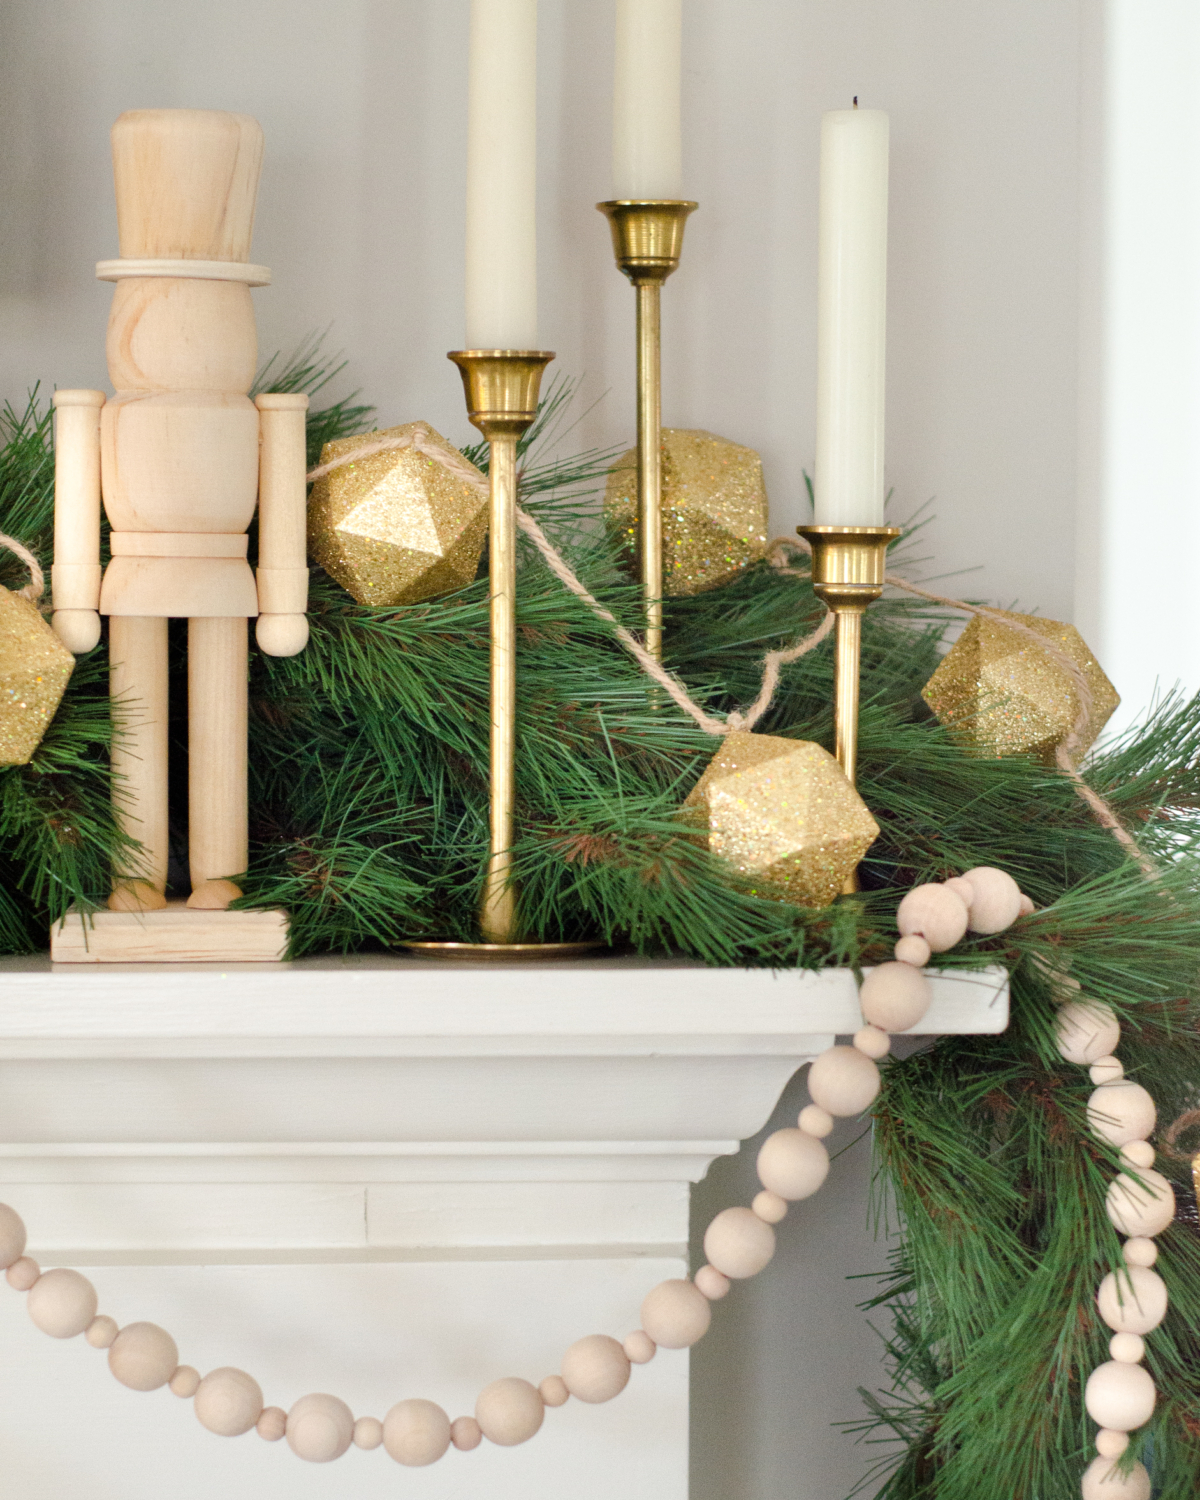 A simple and classic Christmas mantle with greenery, white cable knit stockings, nutcrackers, and gold accents. 2017 Holiday Housewalk